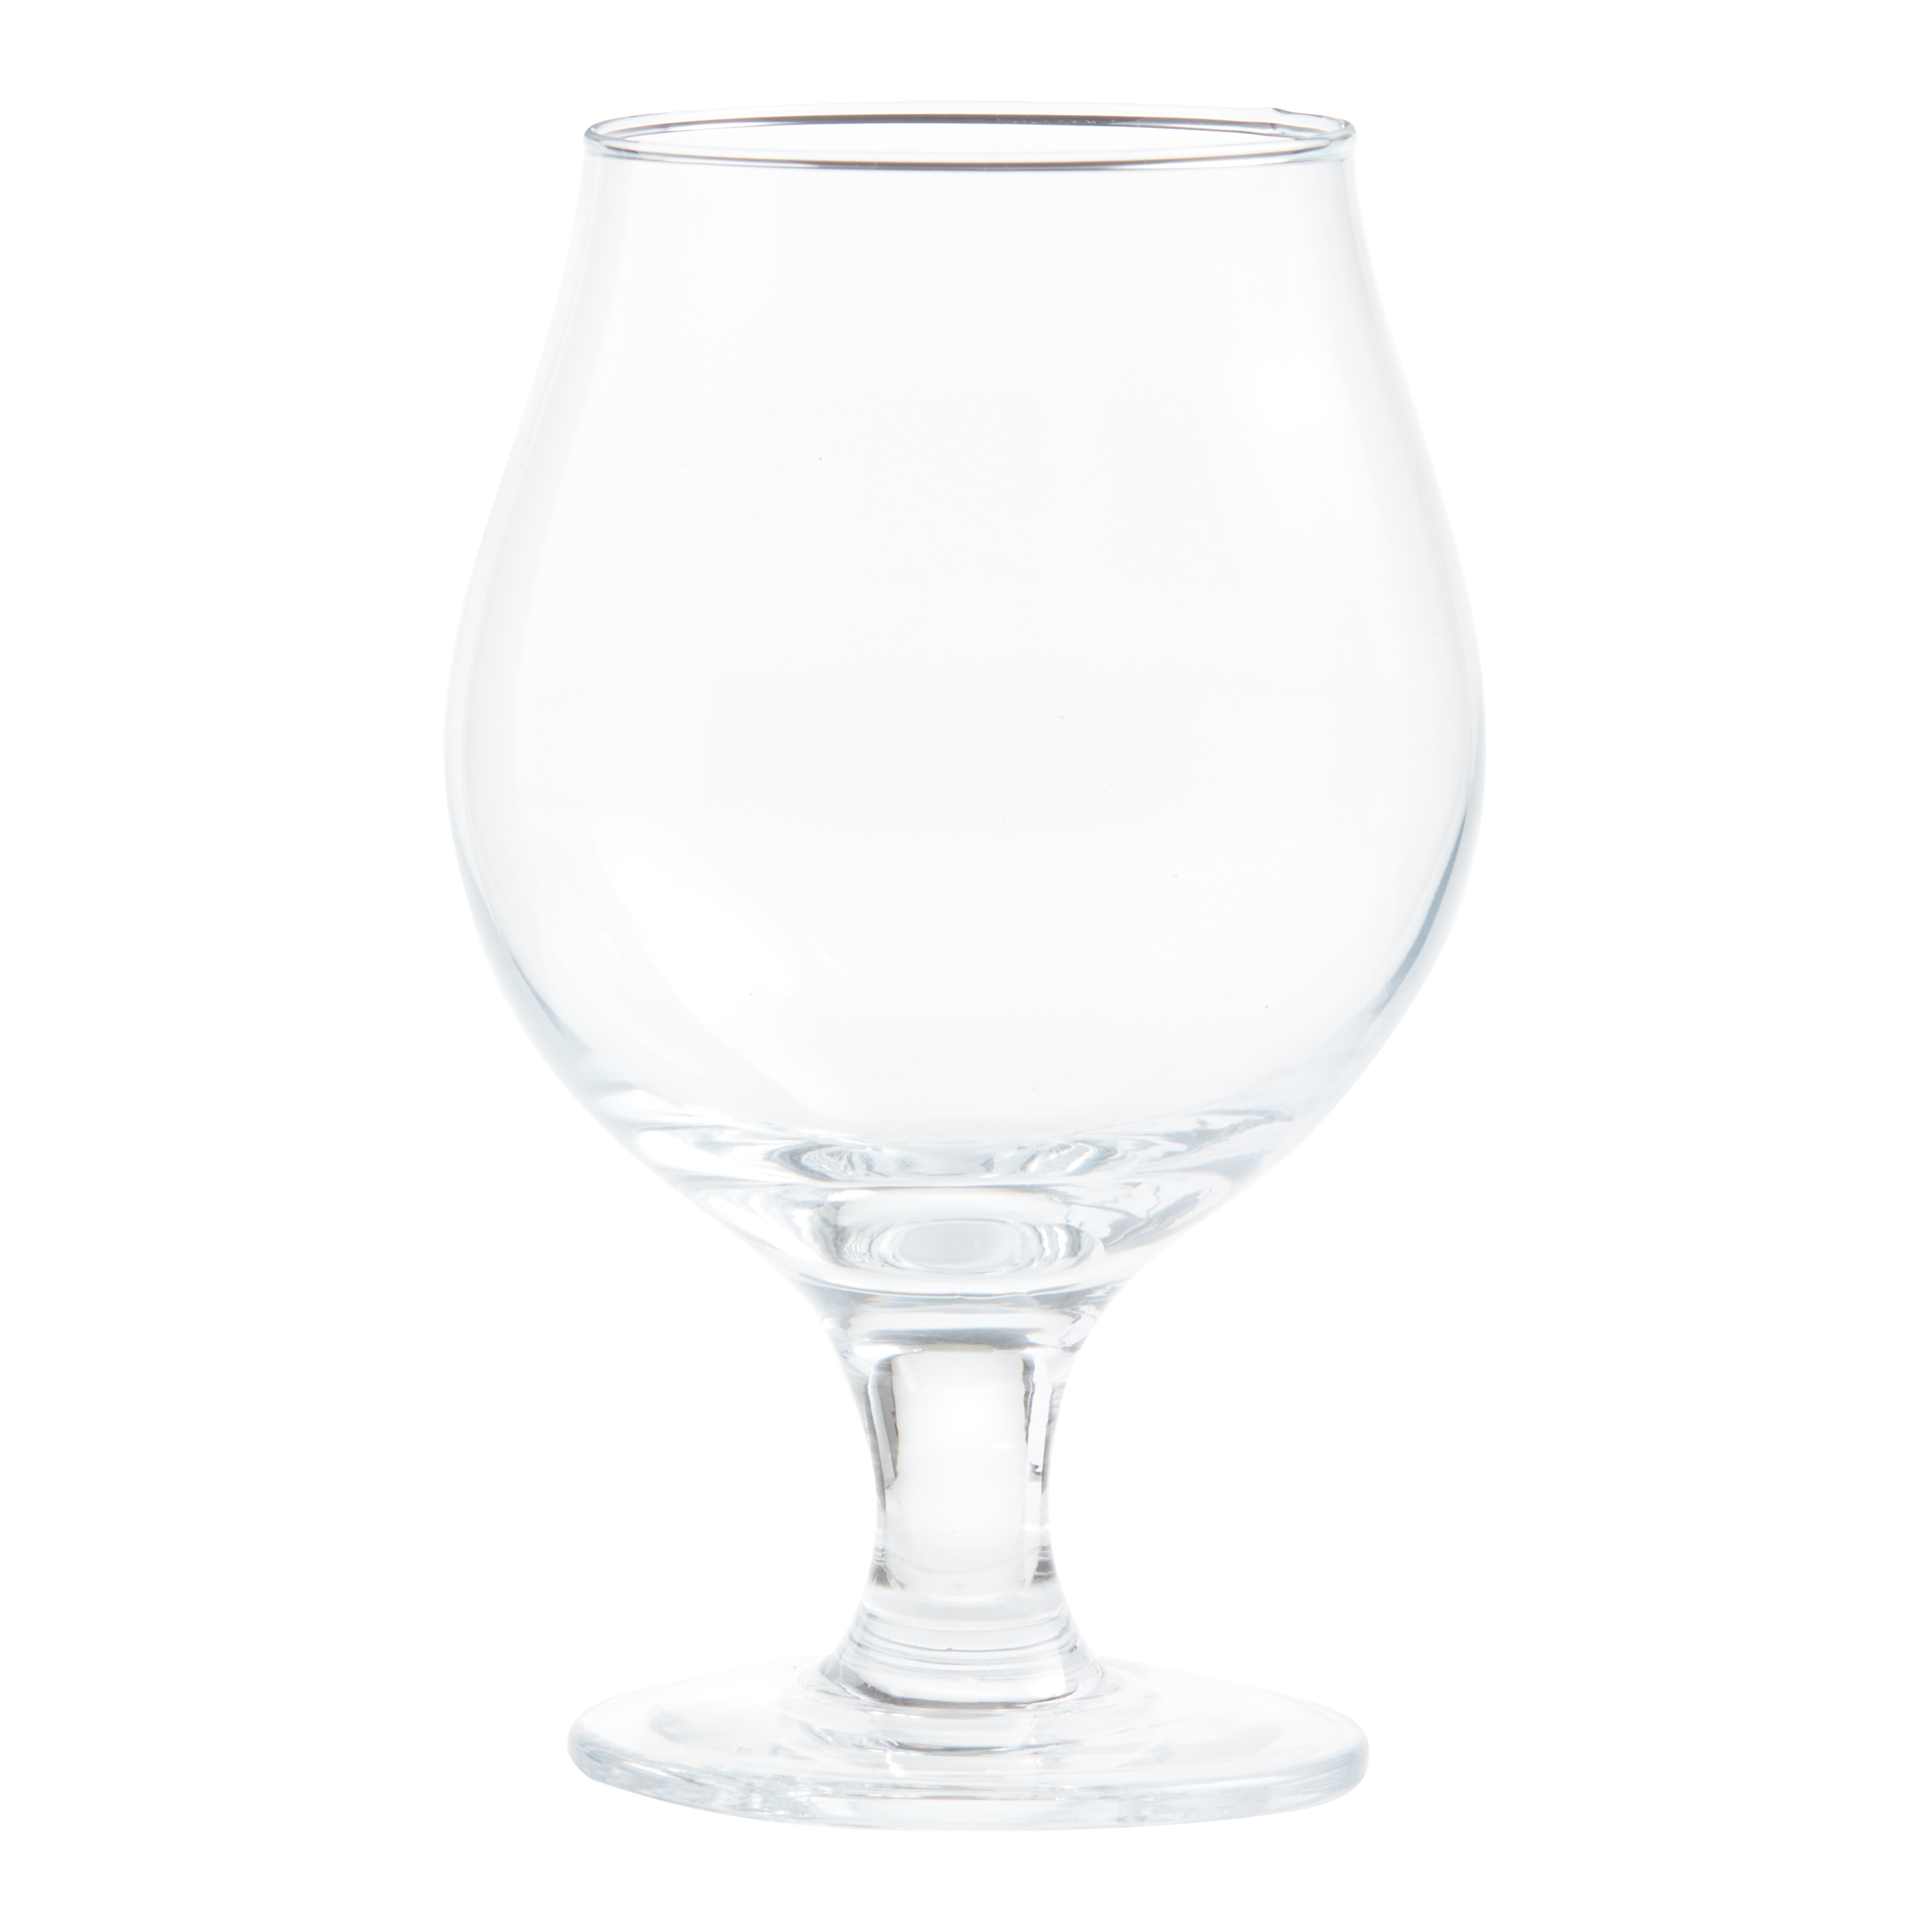 Libbey Classic Sangria/Beer Glasses, Set of 12